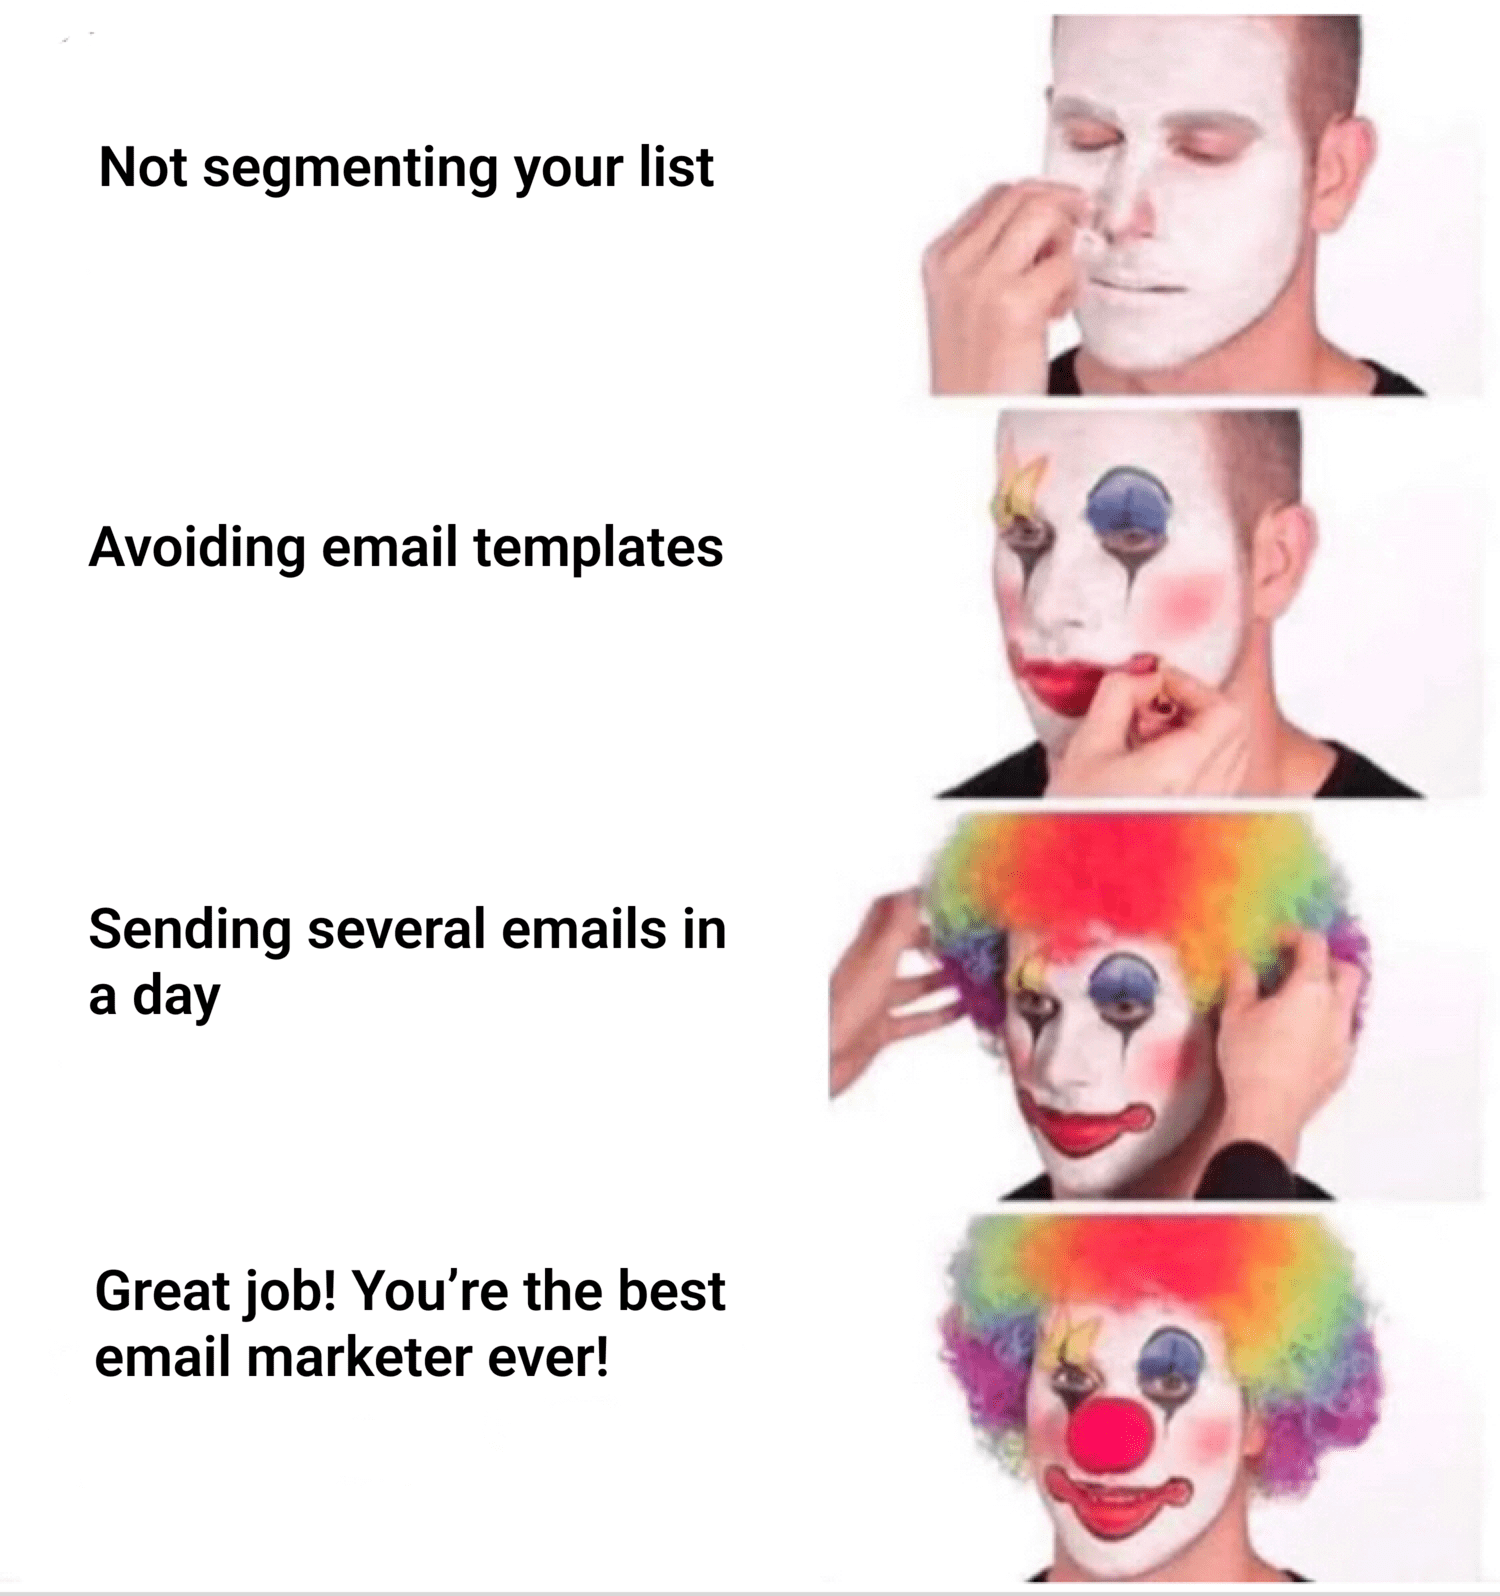 A clown meme with email marketing-related text